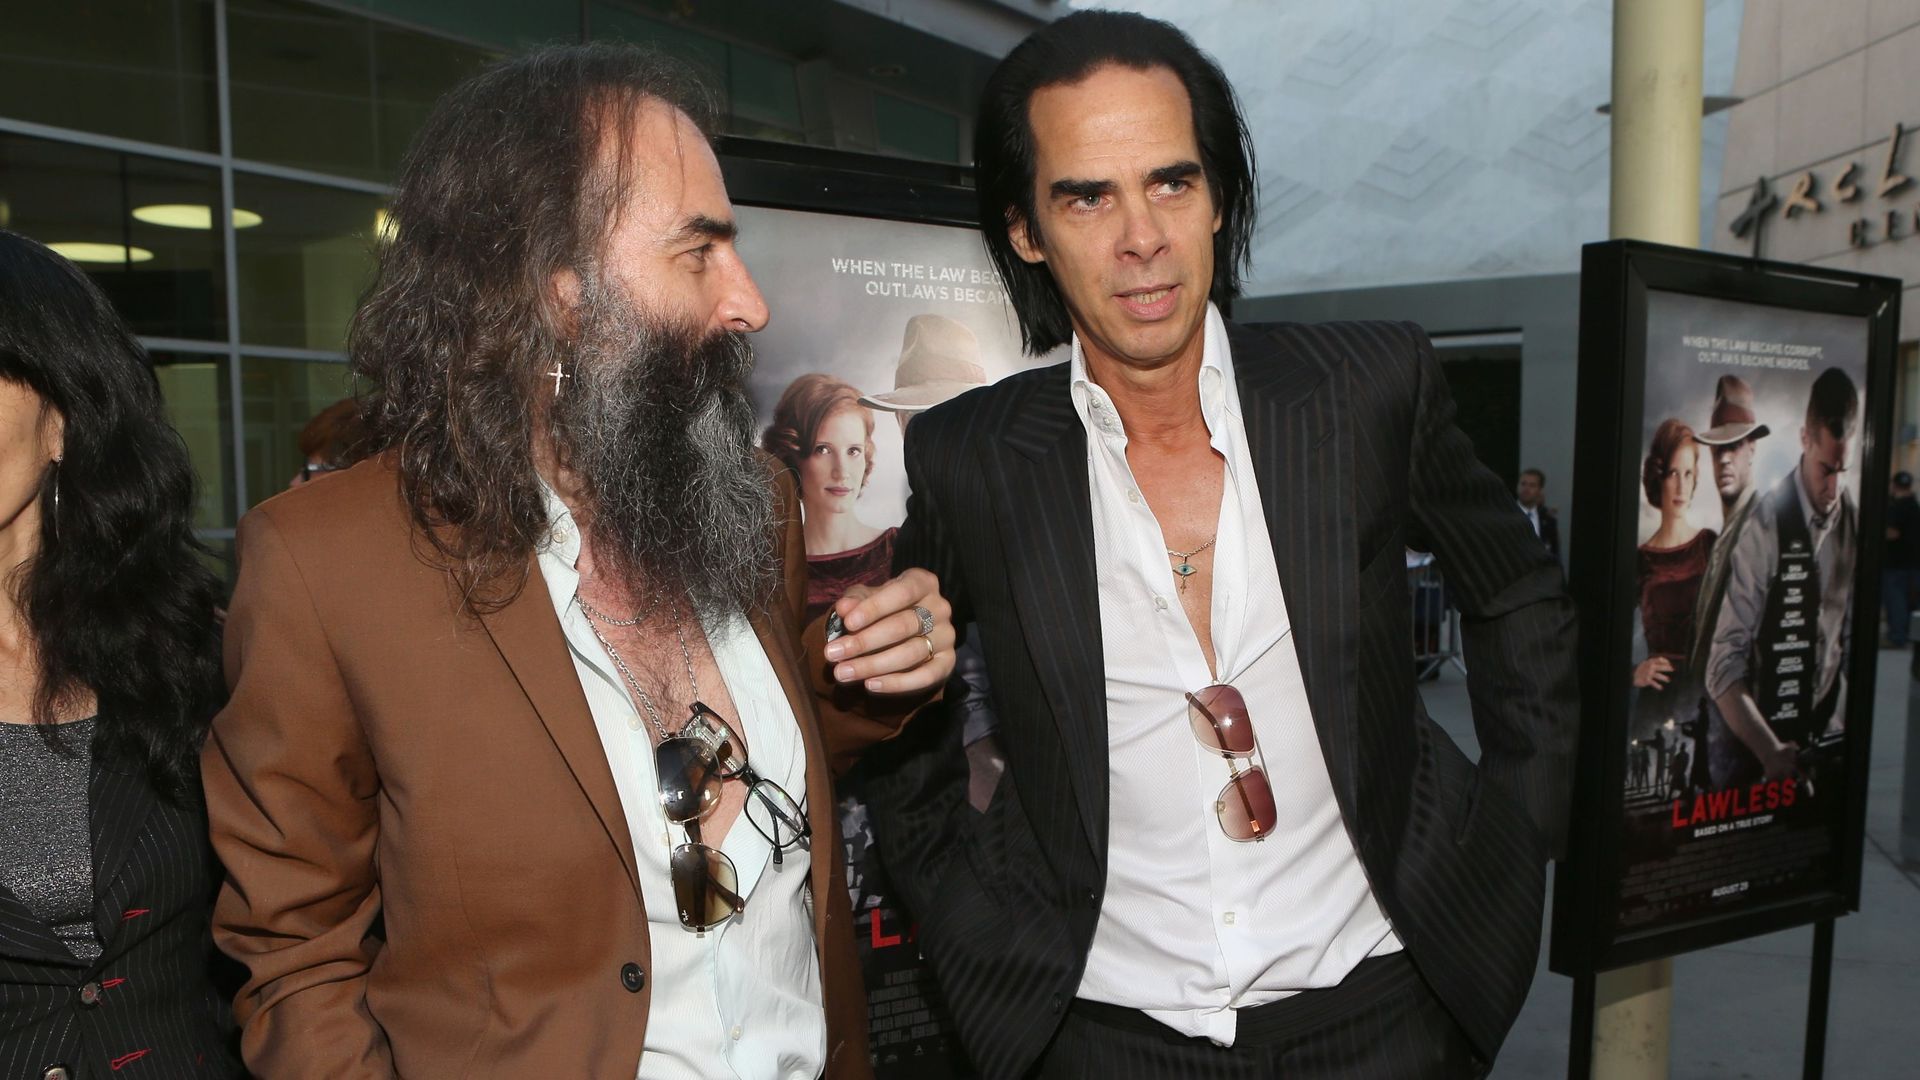 HOLLYWOOD, CA – AUGUST 22 : Screenwriter/composer Nick Cave, (R) and composer Warren Ellis arrive at the premiere of The Weinstein Company’s "Lawless" held at ArcLight Cinemas on August 22, 2012 in Hollywood, California. (Photo by Christopher Polk/Getty I